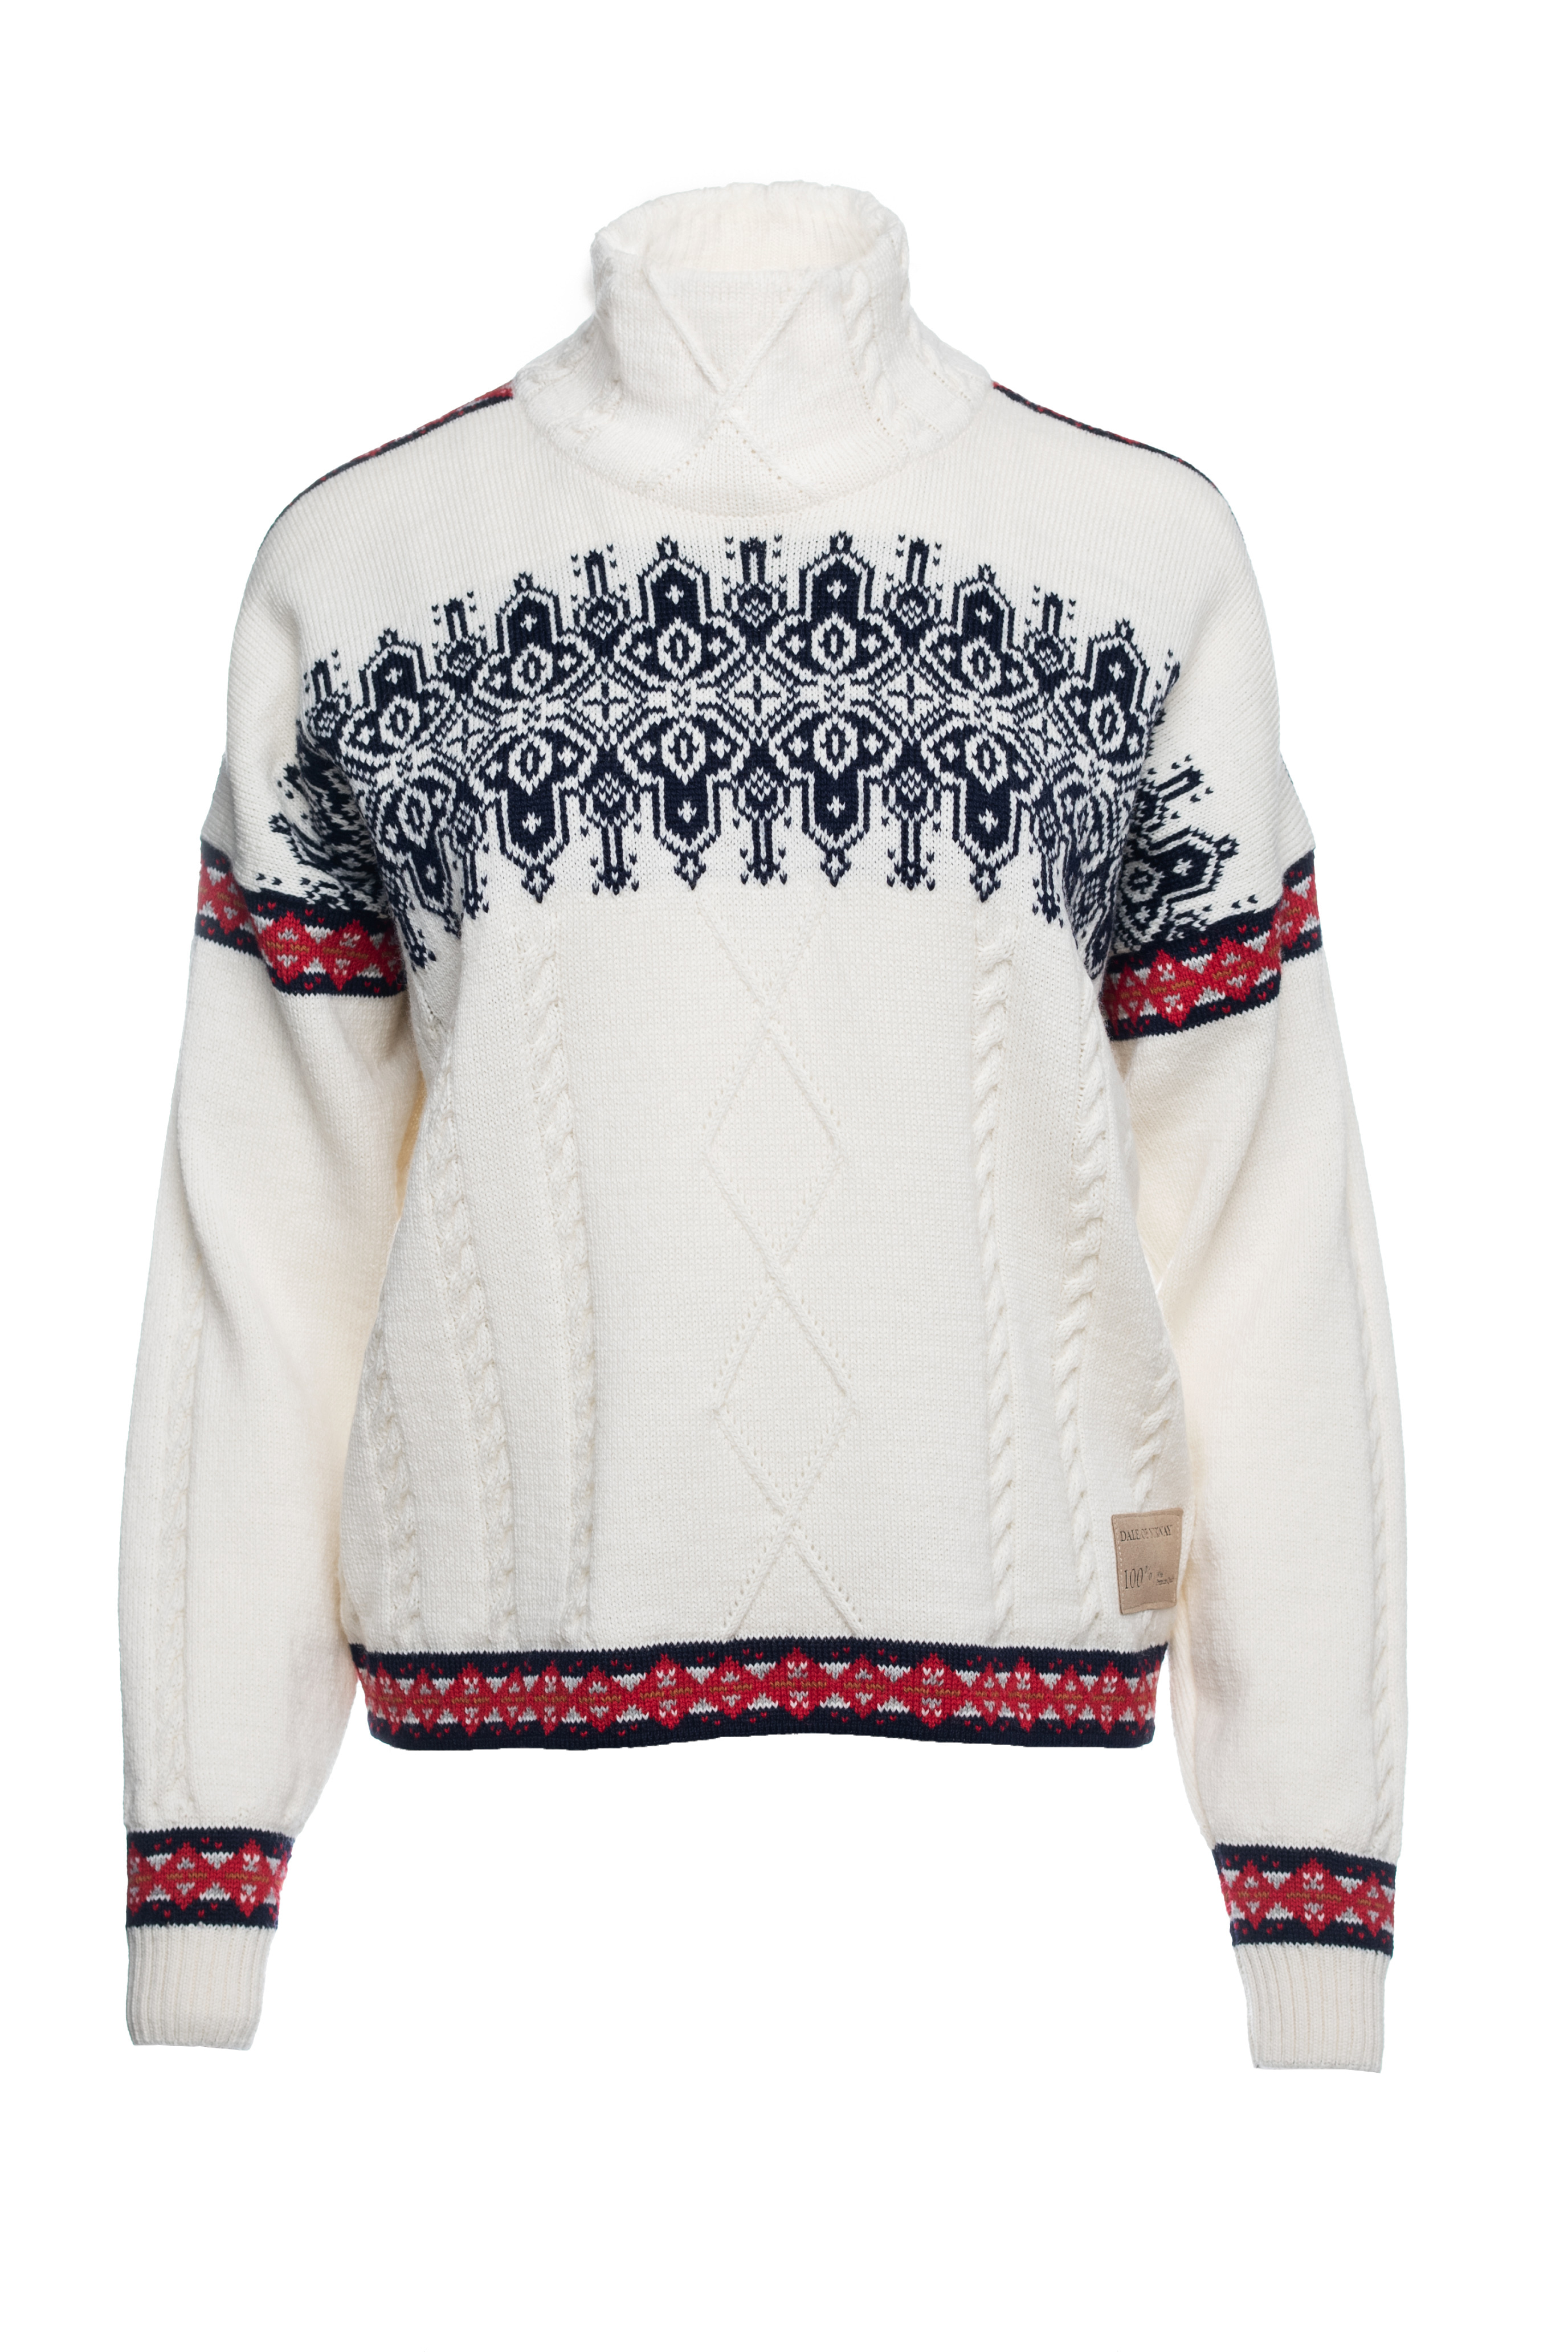 Aspøy sweater - Women - Offwhite - Dale of Norway - Dale of Norway